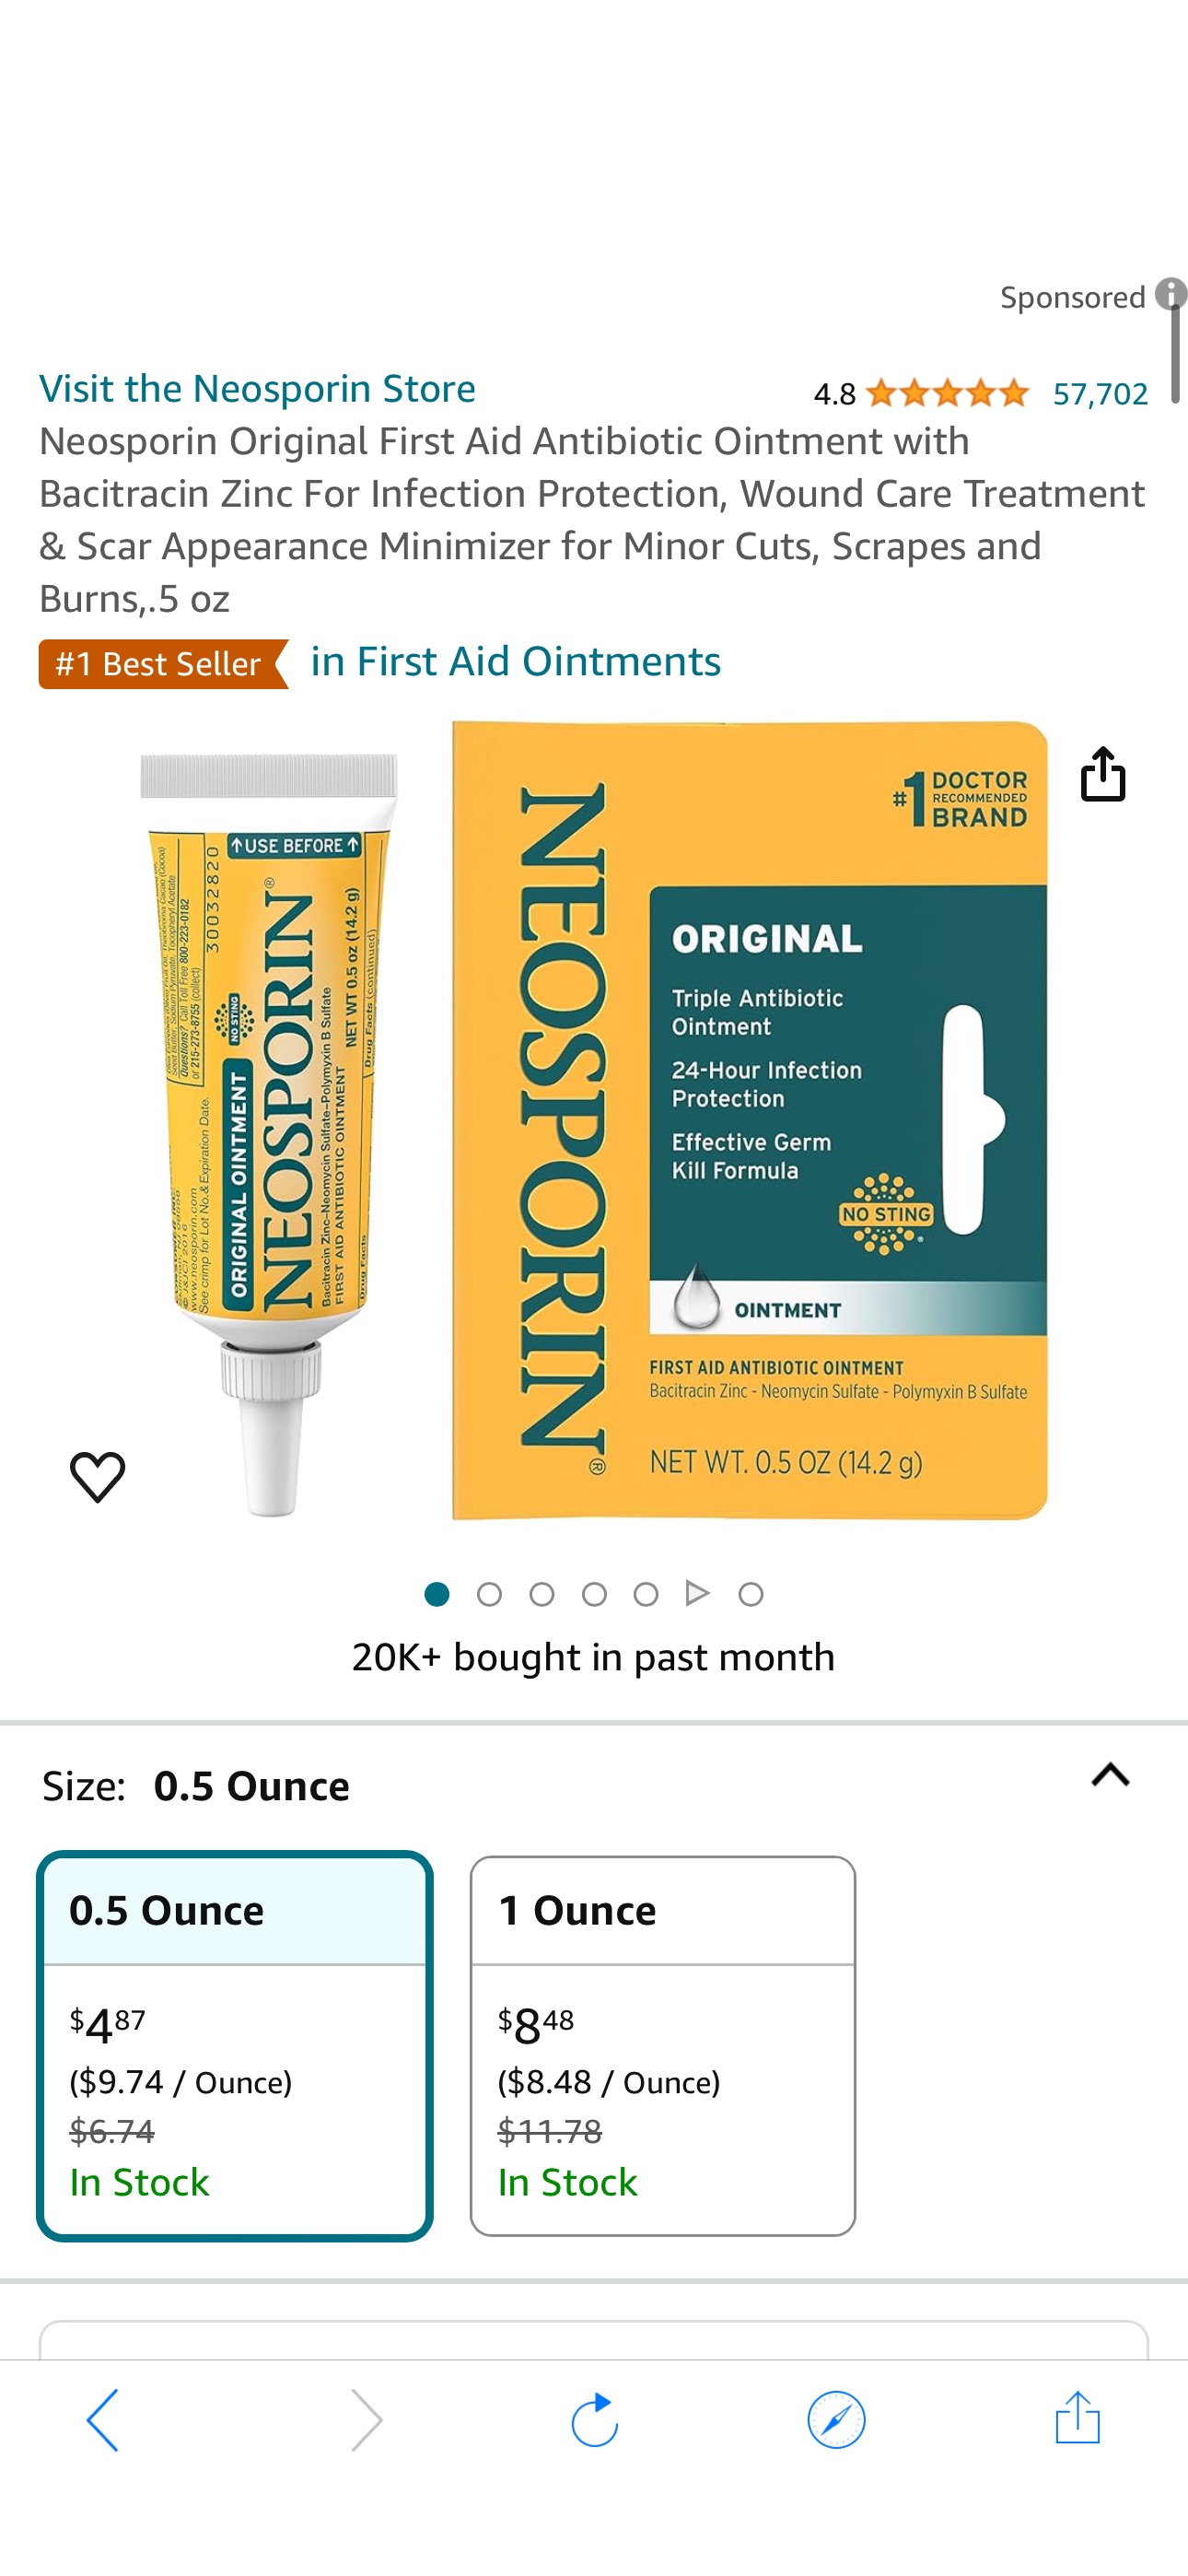 Amazon.com: Neosporin Original First Aid Antibiotic Ointment with Bacitracin Zinc For Infection Protection, Wound Care Treatment & Scar Appearance Minimizer for Minor Cuts, Scrapes and Burns,.5 oz : H